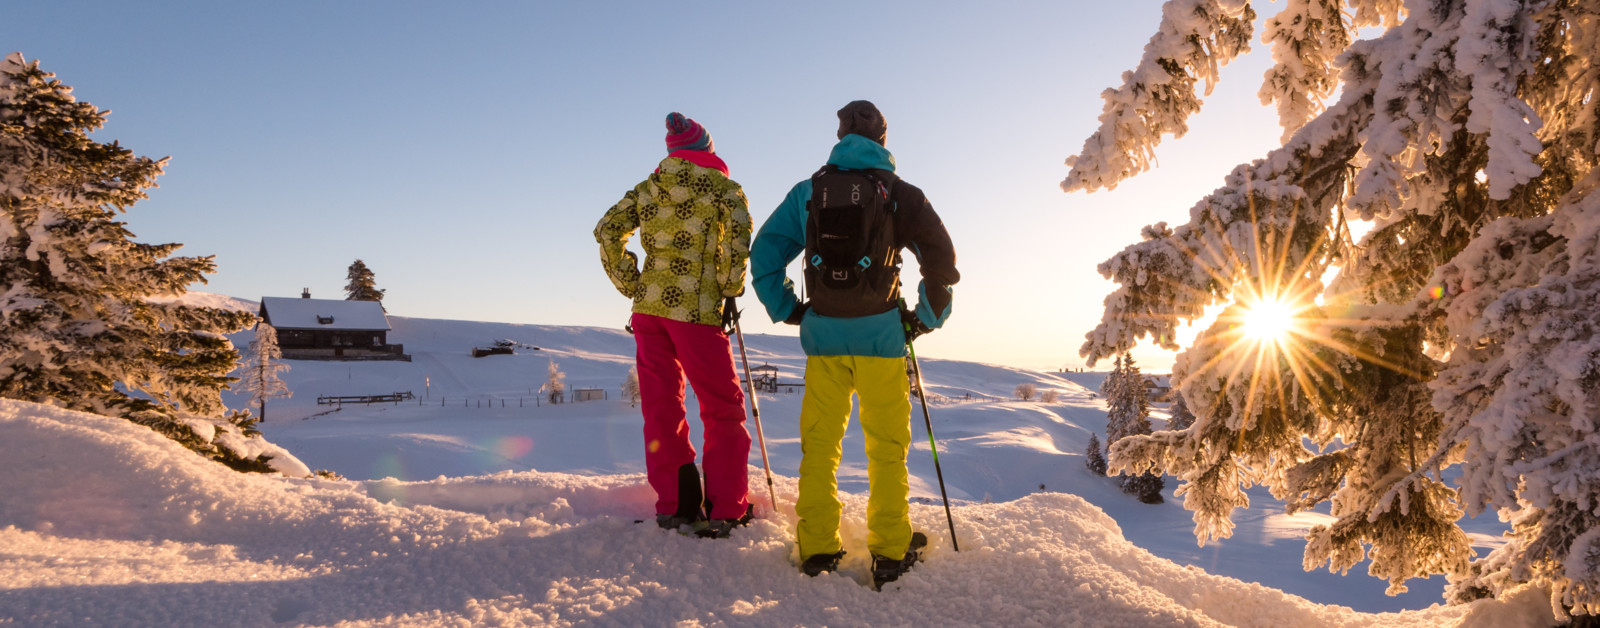 Sustainability on winter holidays and in ski resorts